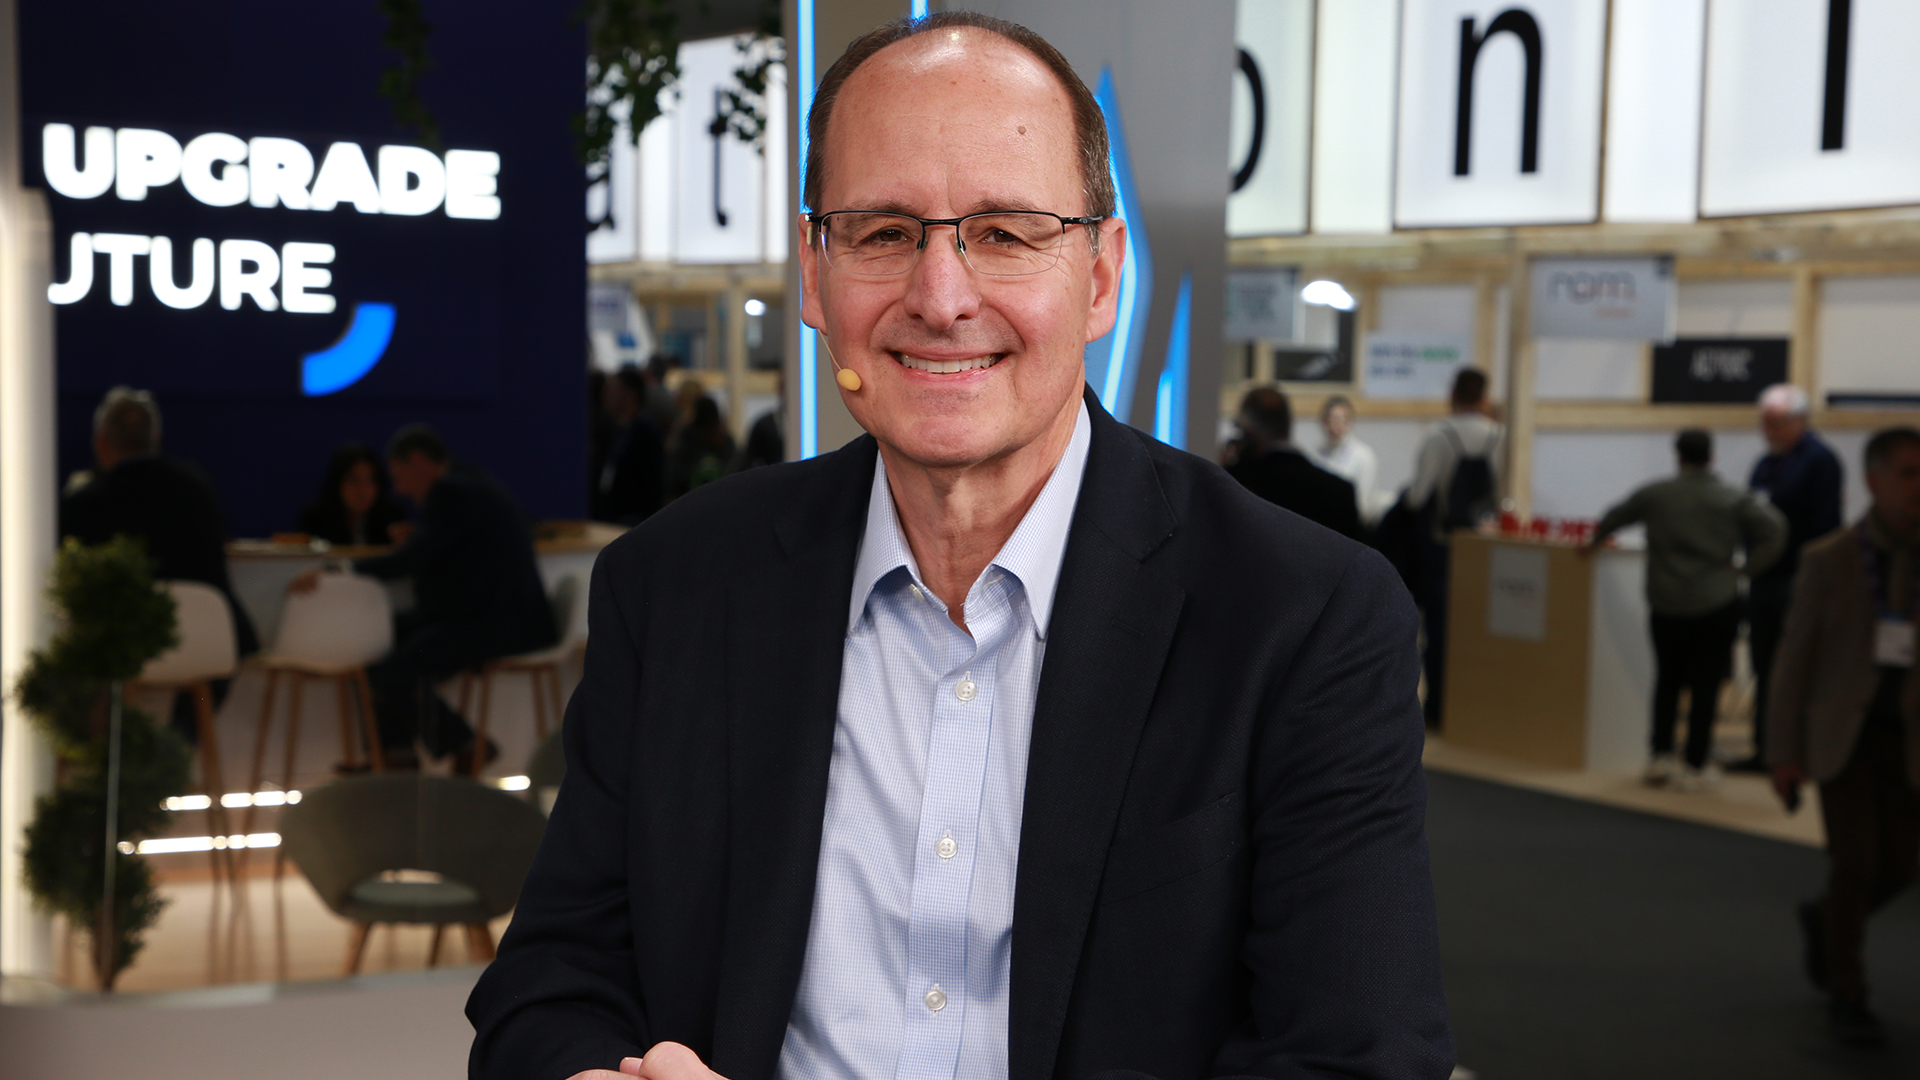 Bill Gartner, senior vice president and general manager at Cisco Systems Inc., talks with theCUBE about how Routed Optical Networking is emerging as a game-changer in the networking industry